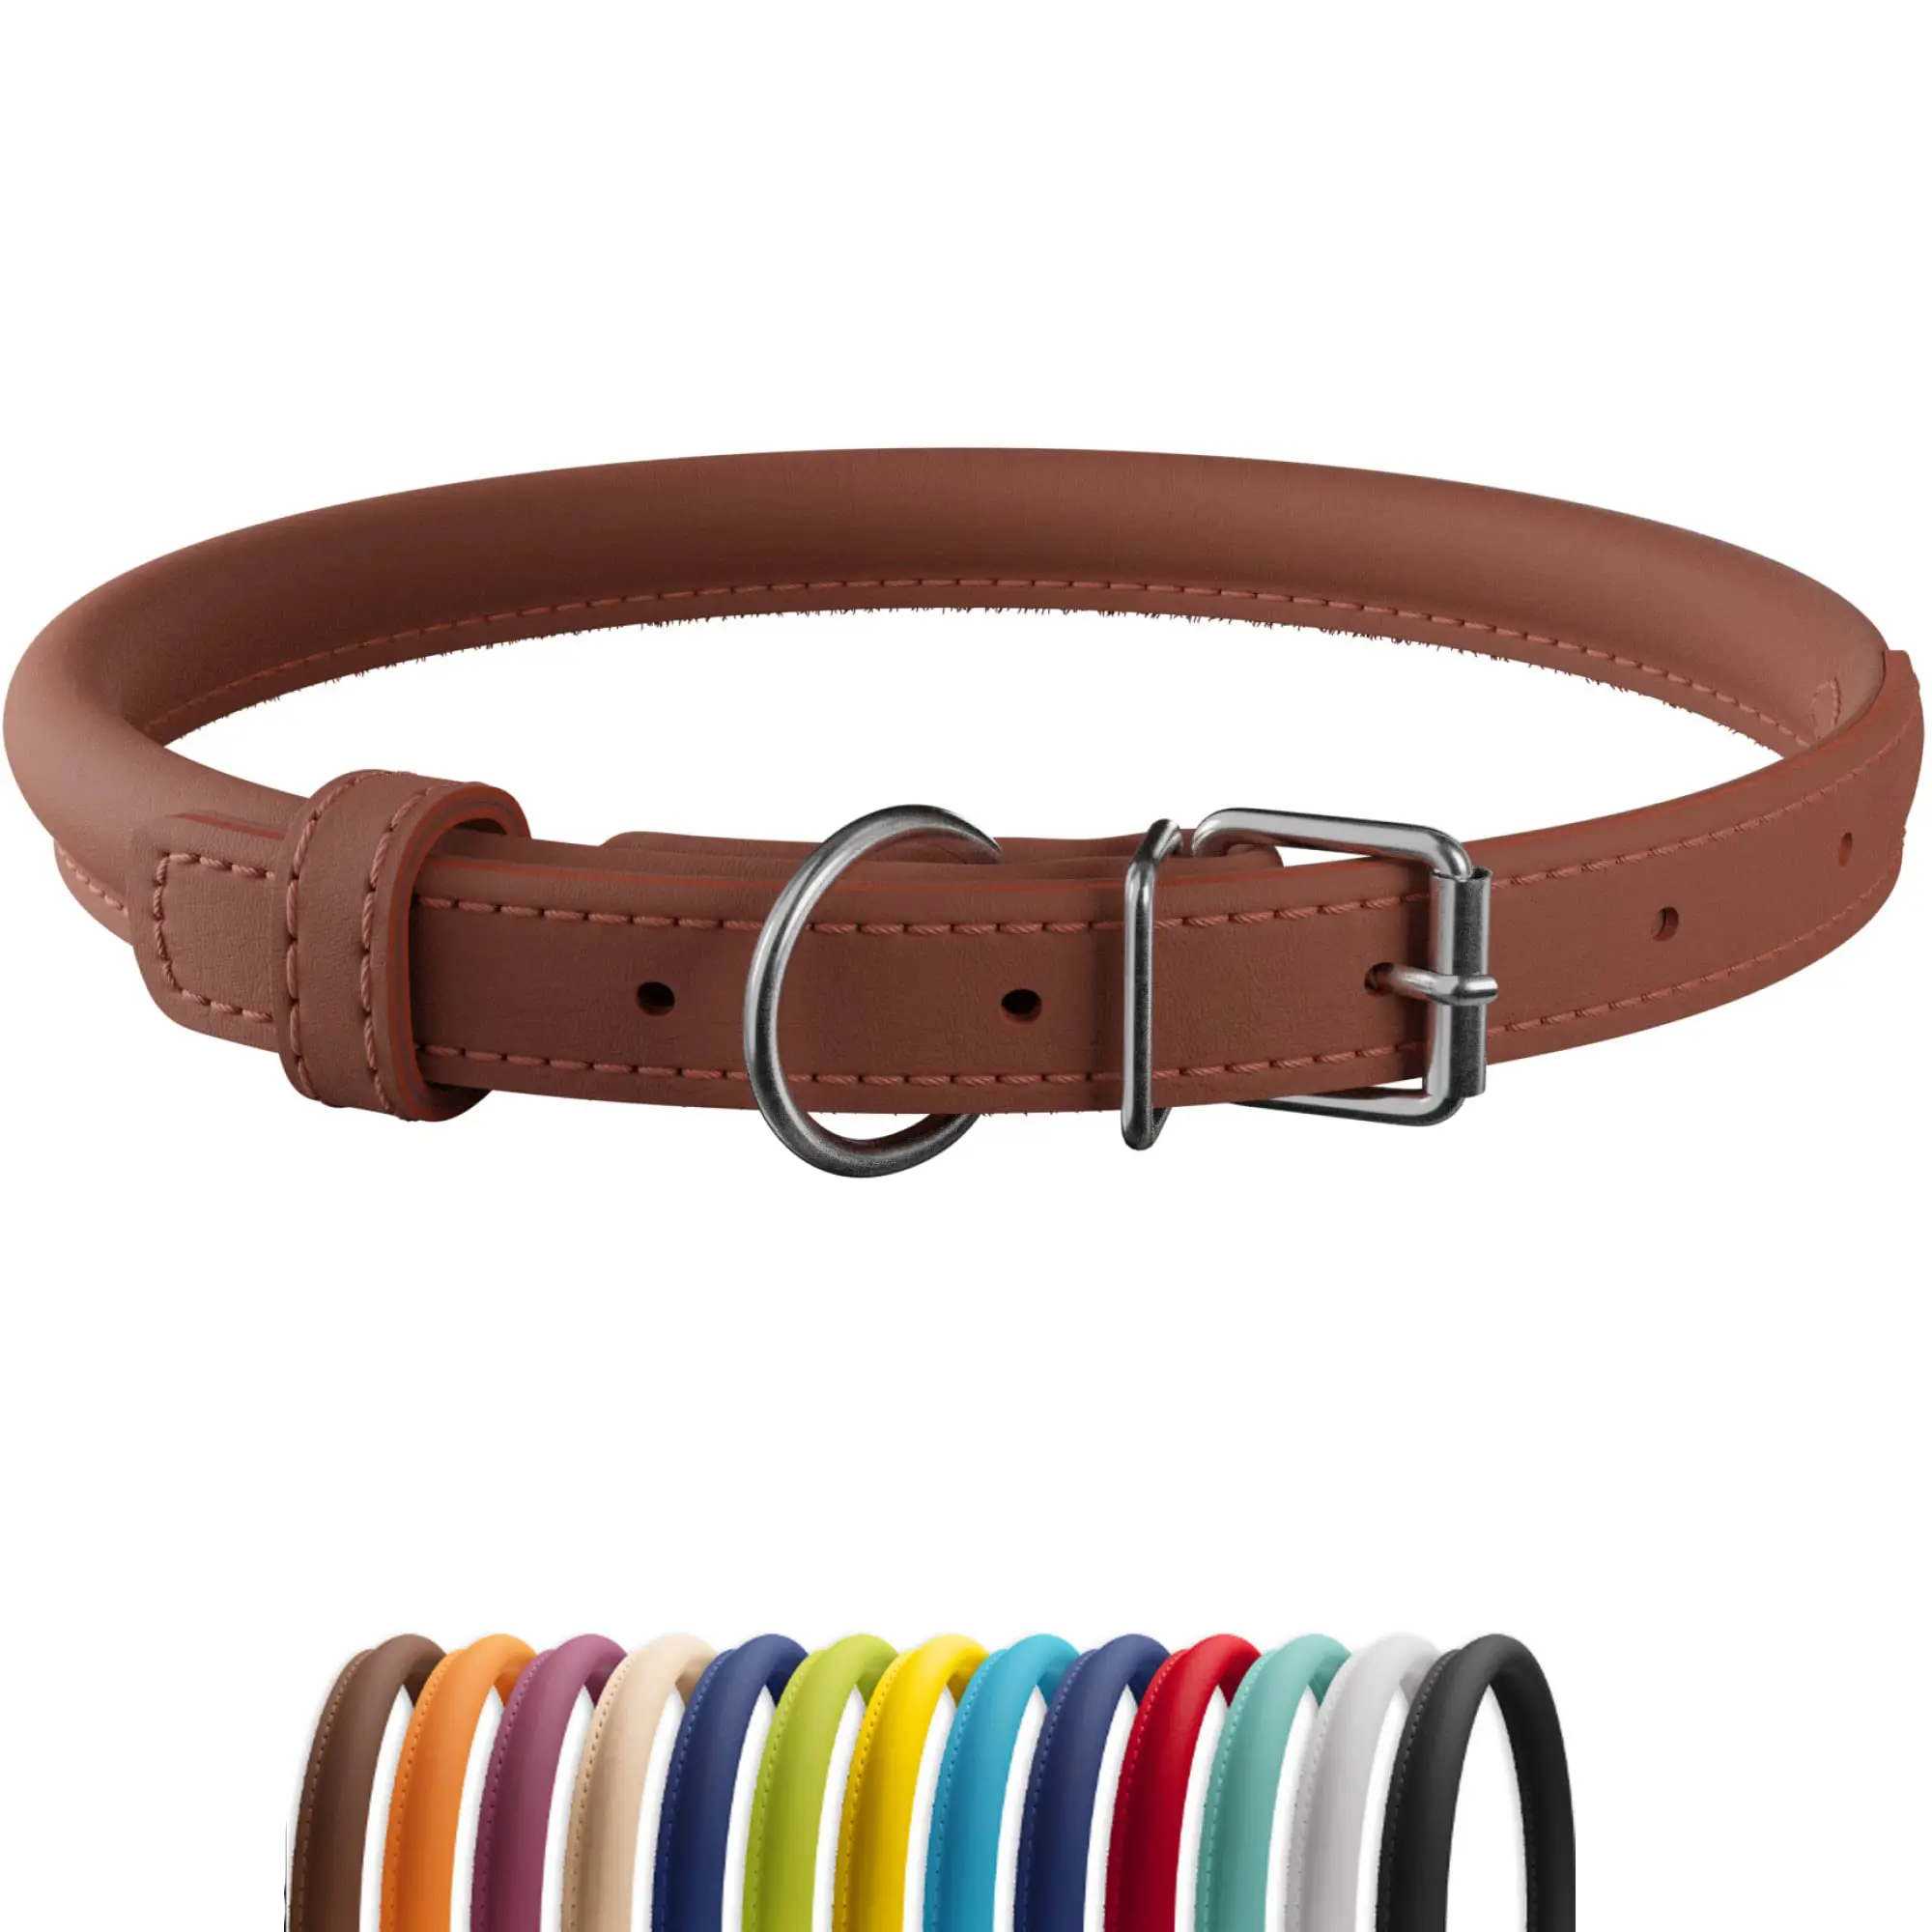 Luxury custom vegetarian authentic adjustable woven brown dog PU leather collar and leather dog strap collar